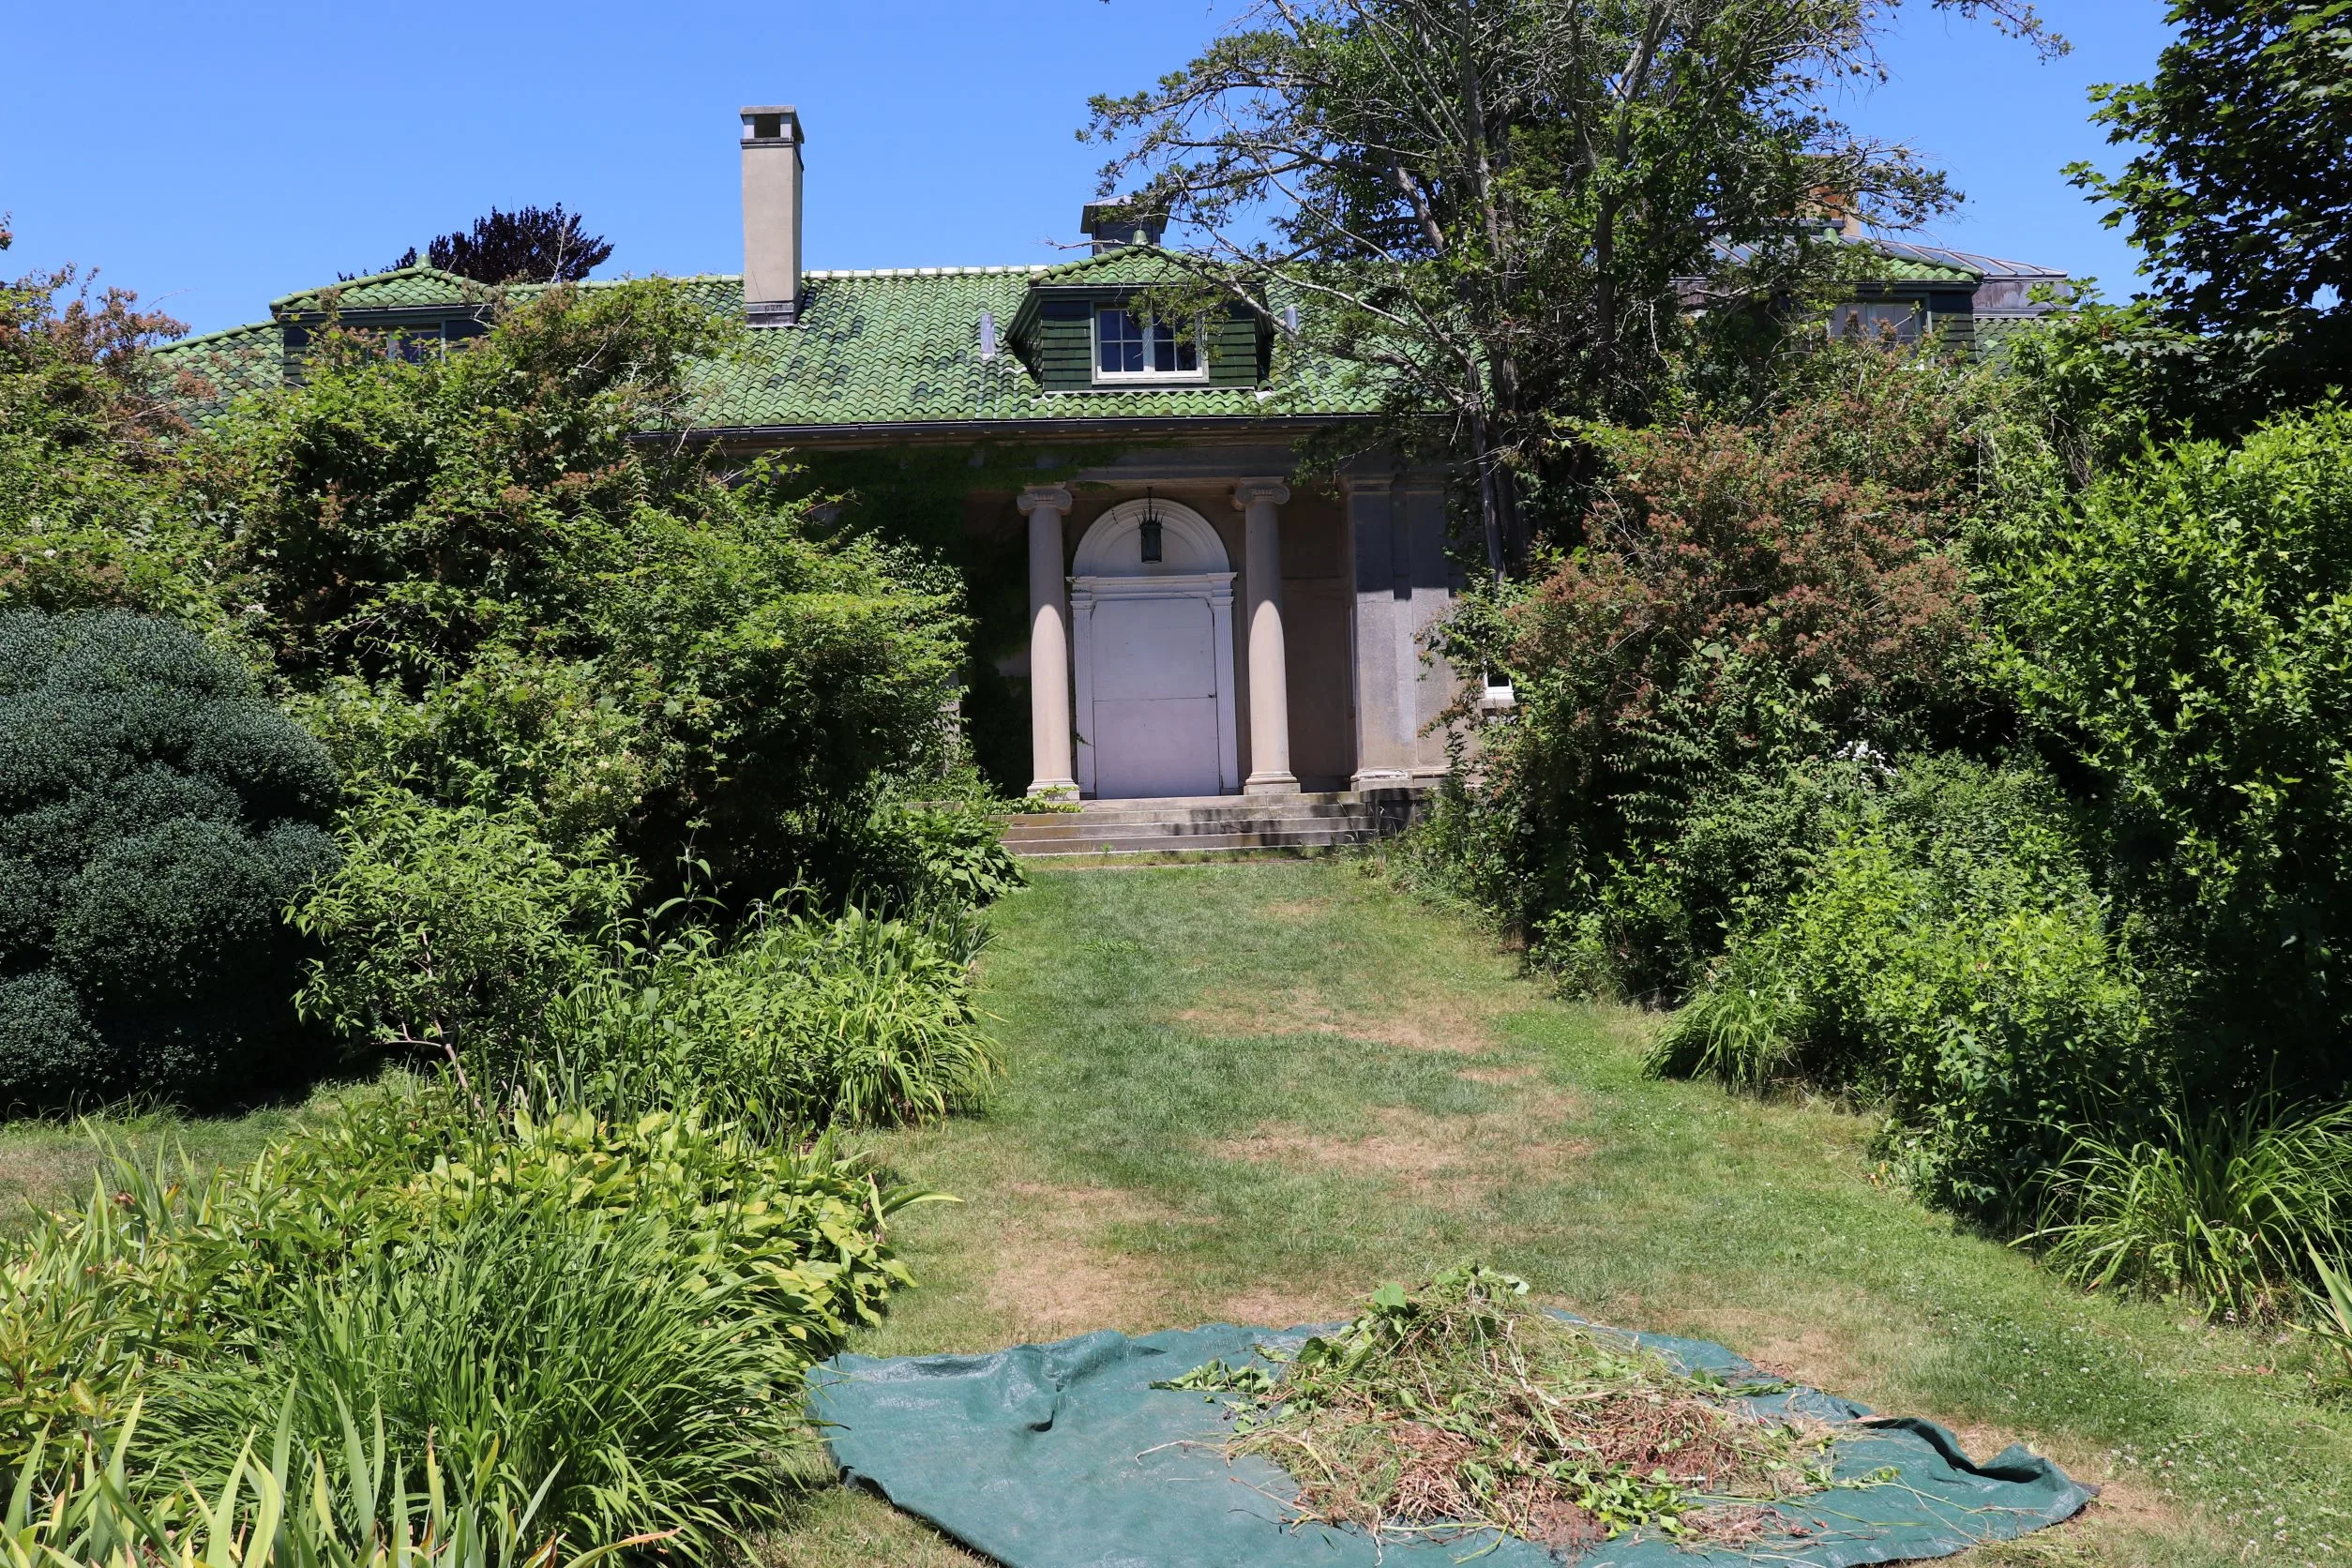 Image of the Carriage House near the gardens at Harkness Park in Waterford, CT.